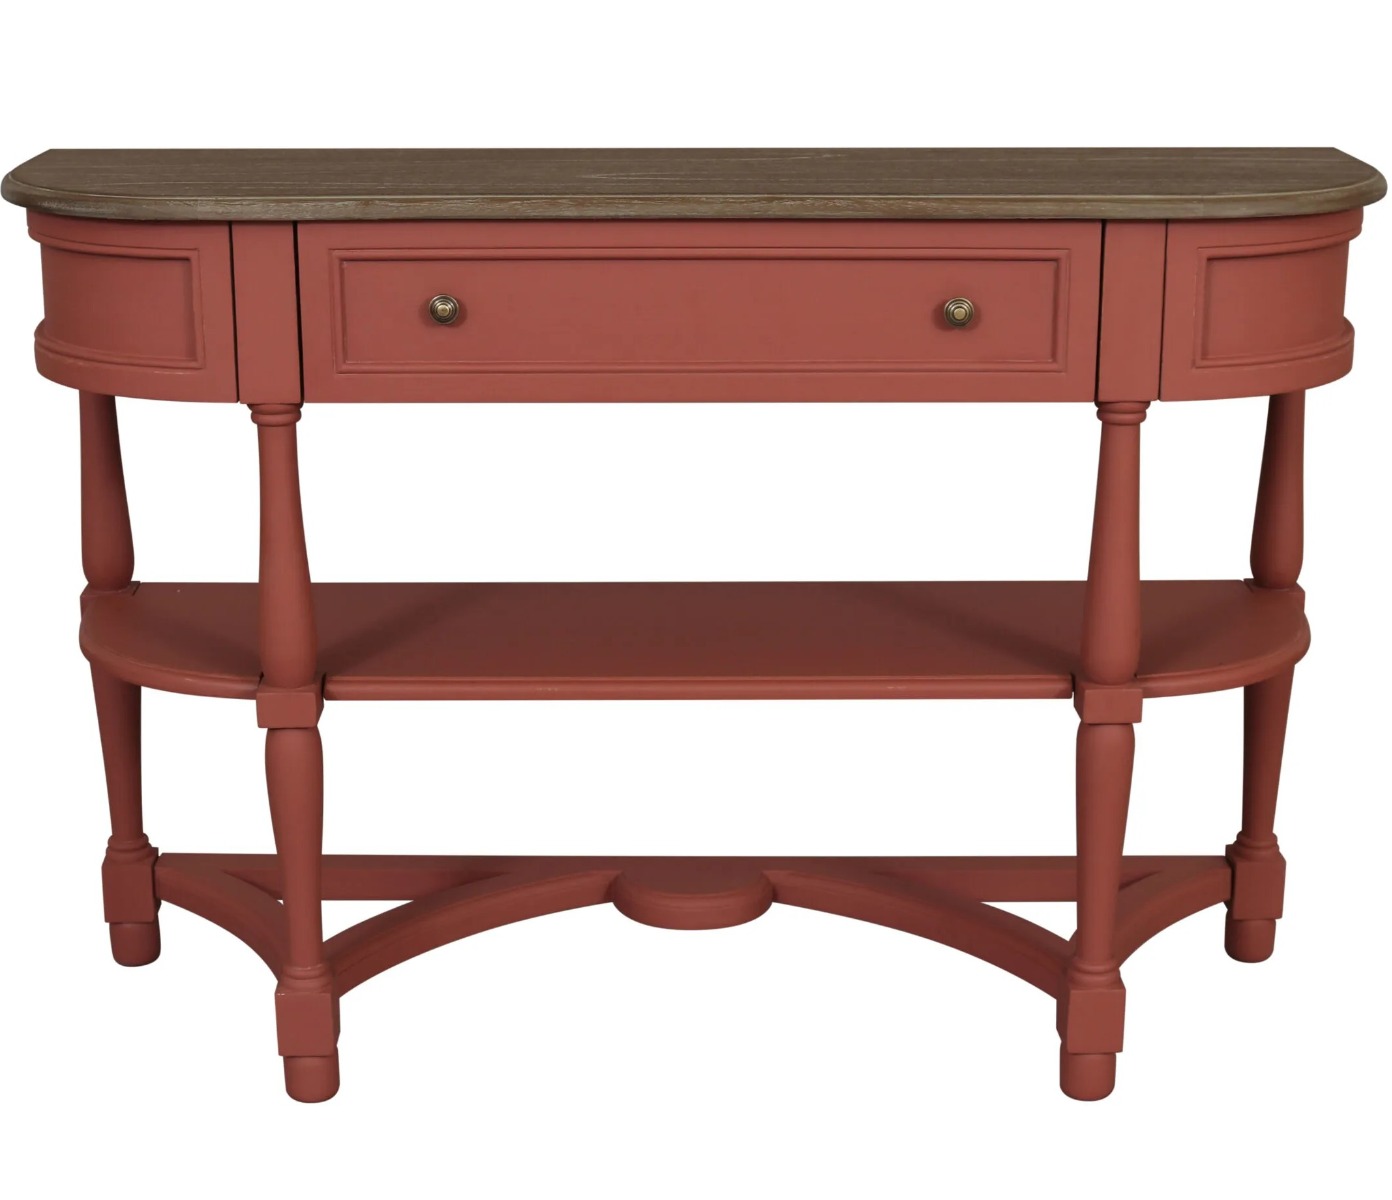 Jardin Console Table in Red